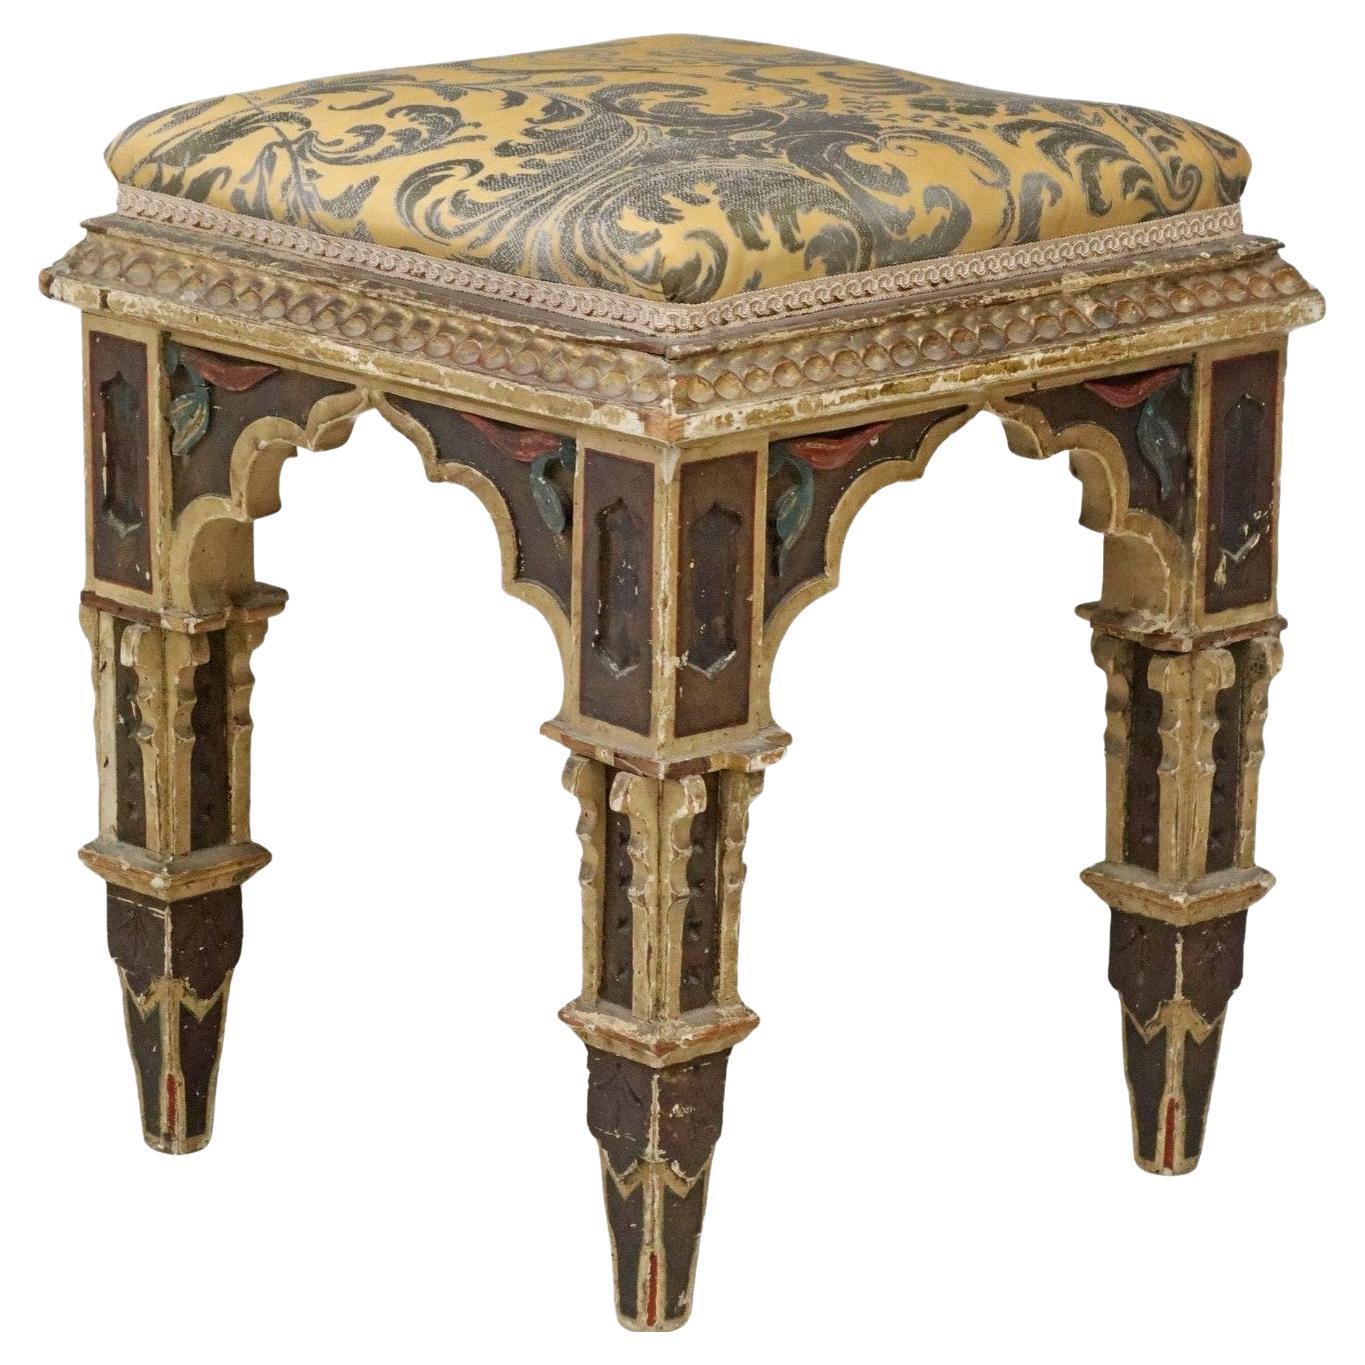 Antique Gothic Revival Carved Polychrome Painted & Upholstered Stool Ottoman For Sale